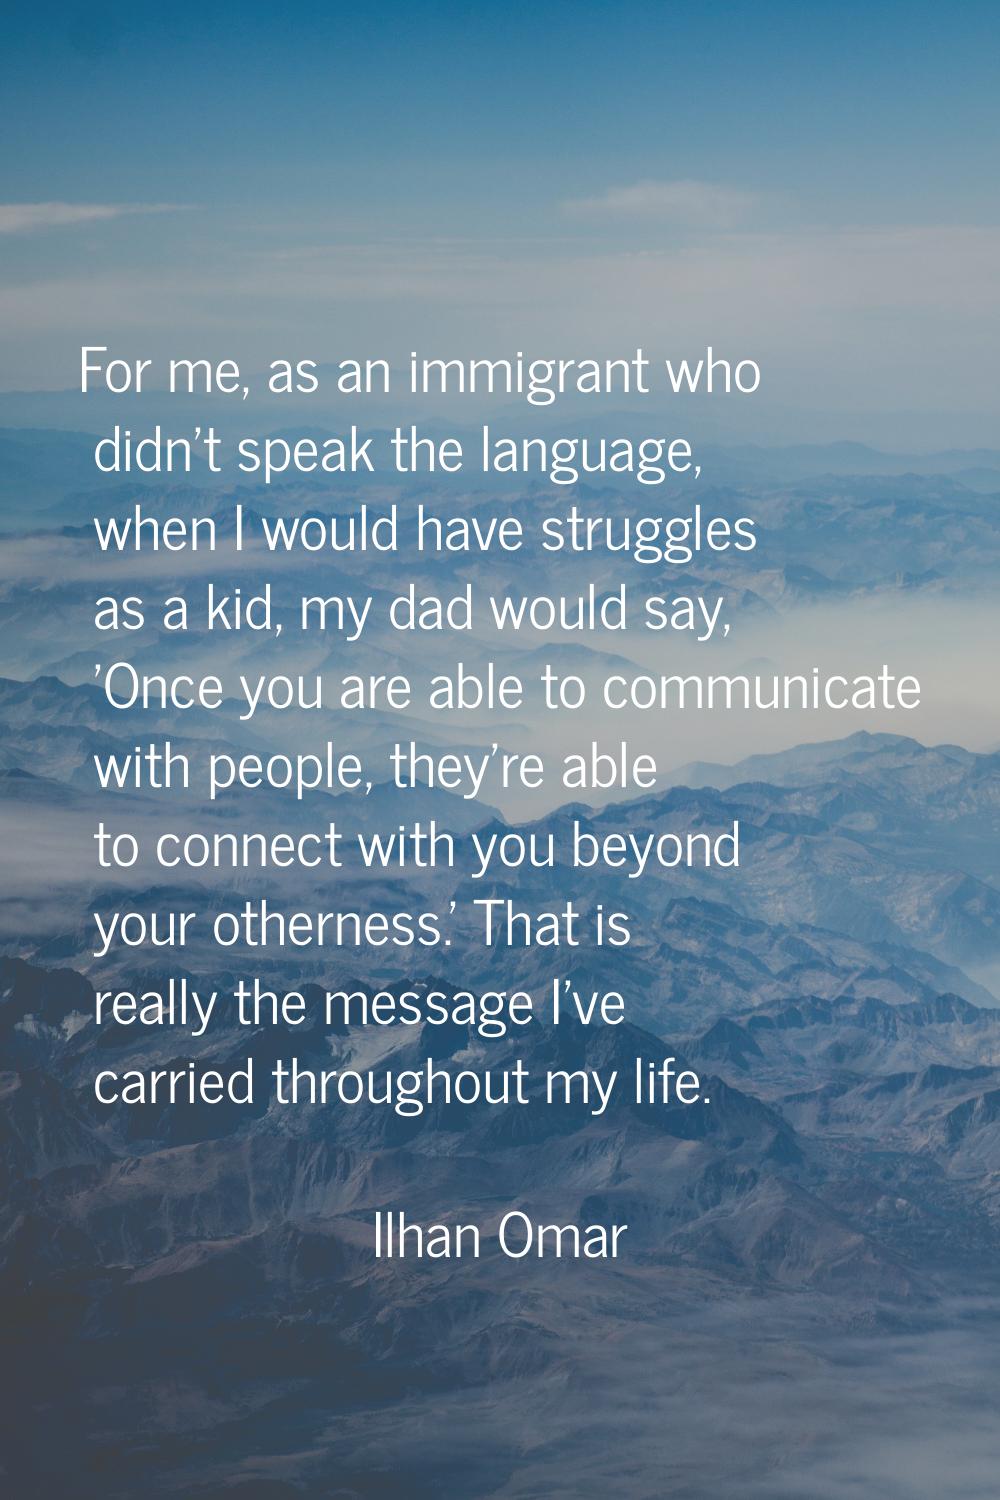 For me, as an immigrant who didn't speak the language, when I would have struggles as a kid, my dad